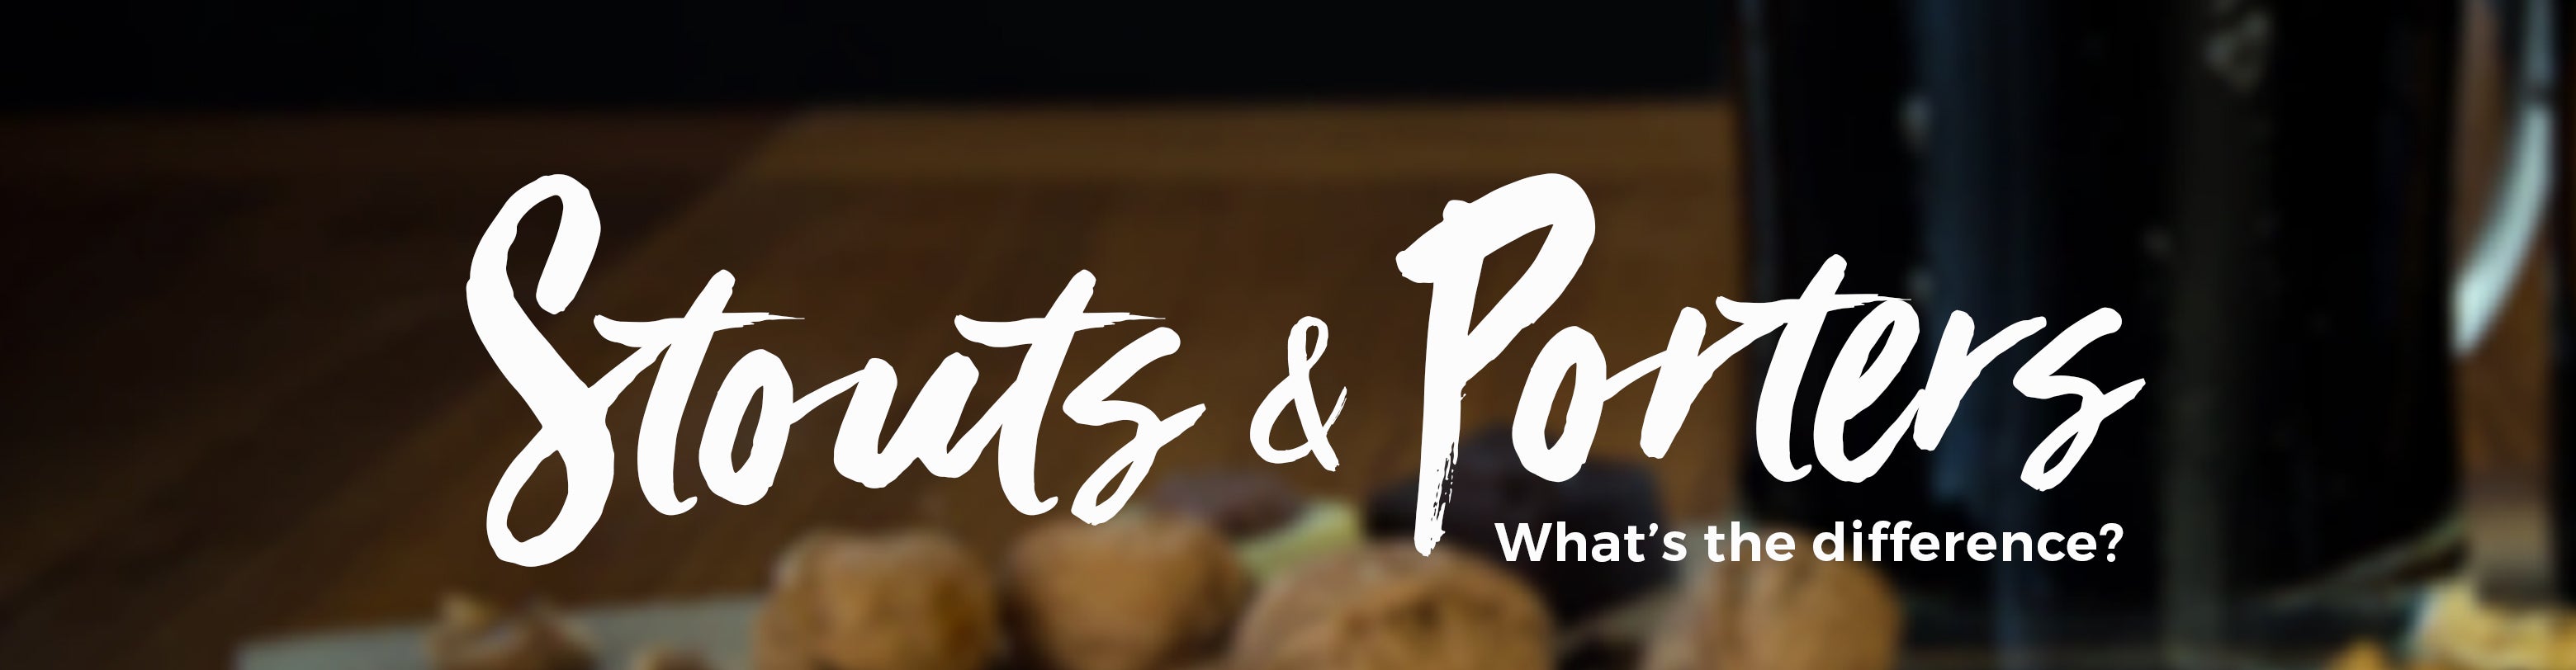 Stouts and Porters - the differences between two beers